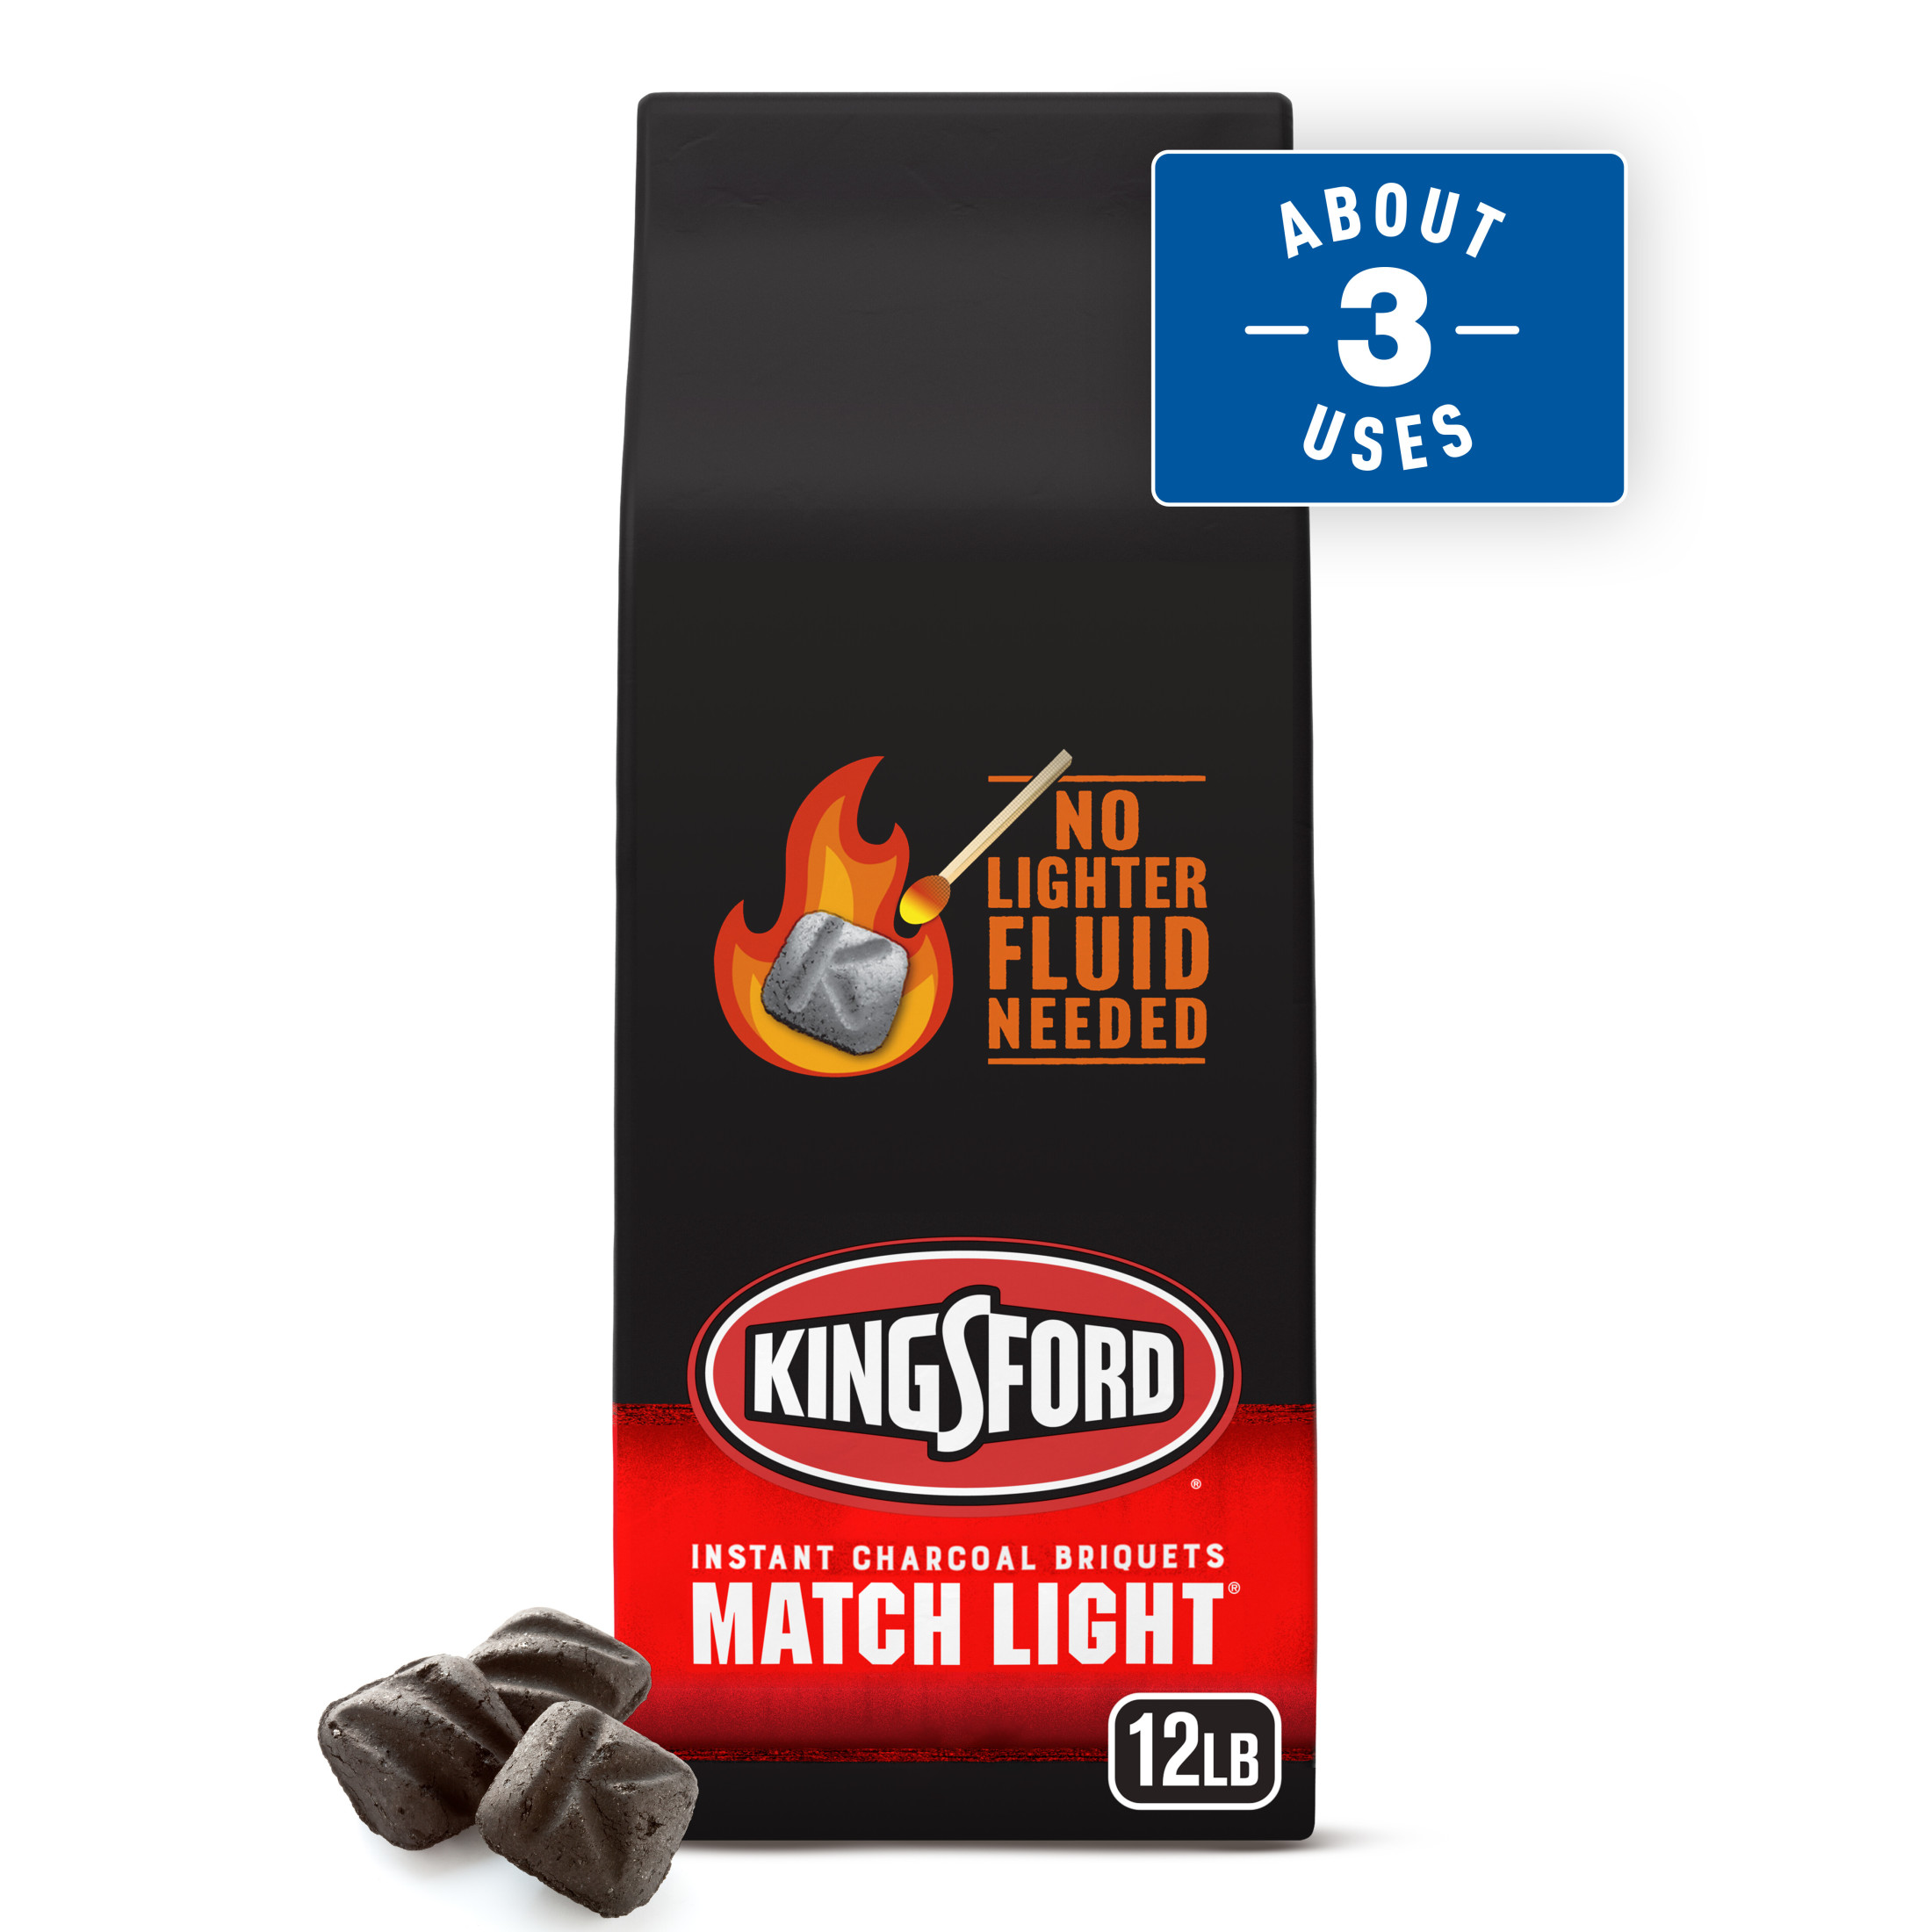 Kingsford Match Light Instant Charcoal Briquettes, 12 lb - image 1 of 9